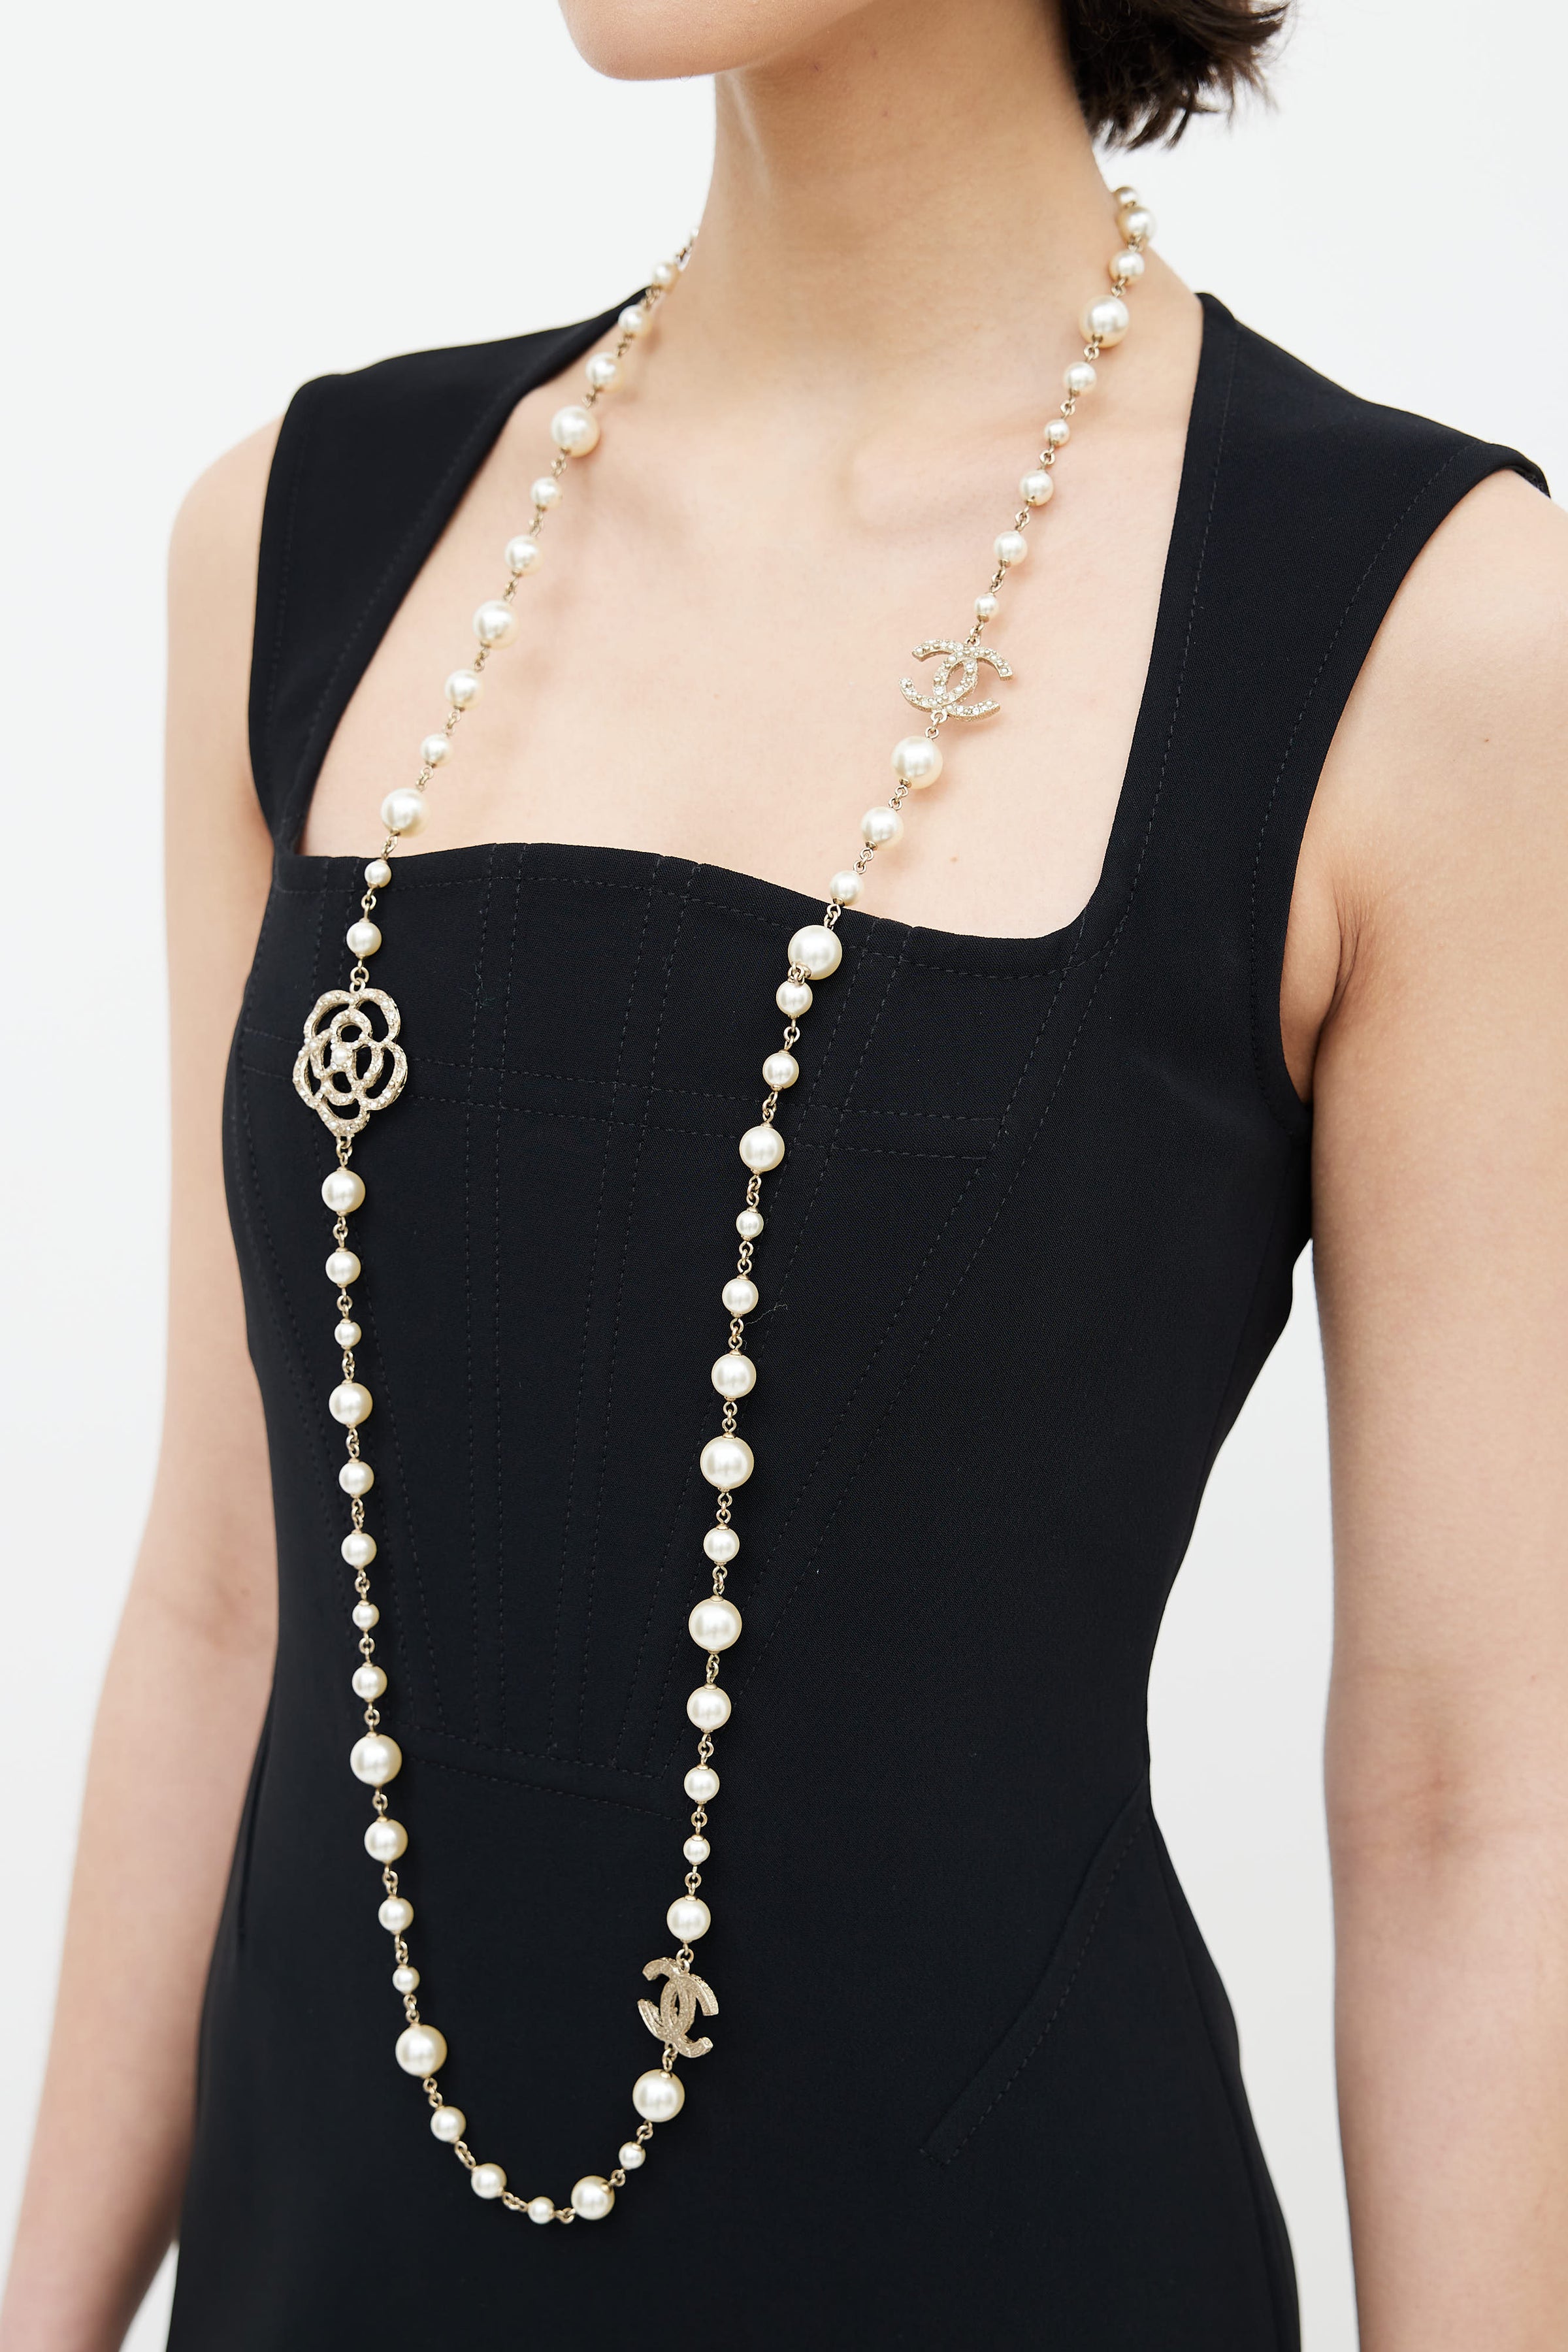 Chanel Faux Pearl Necklace w/ Tags